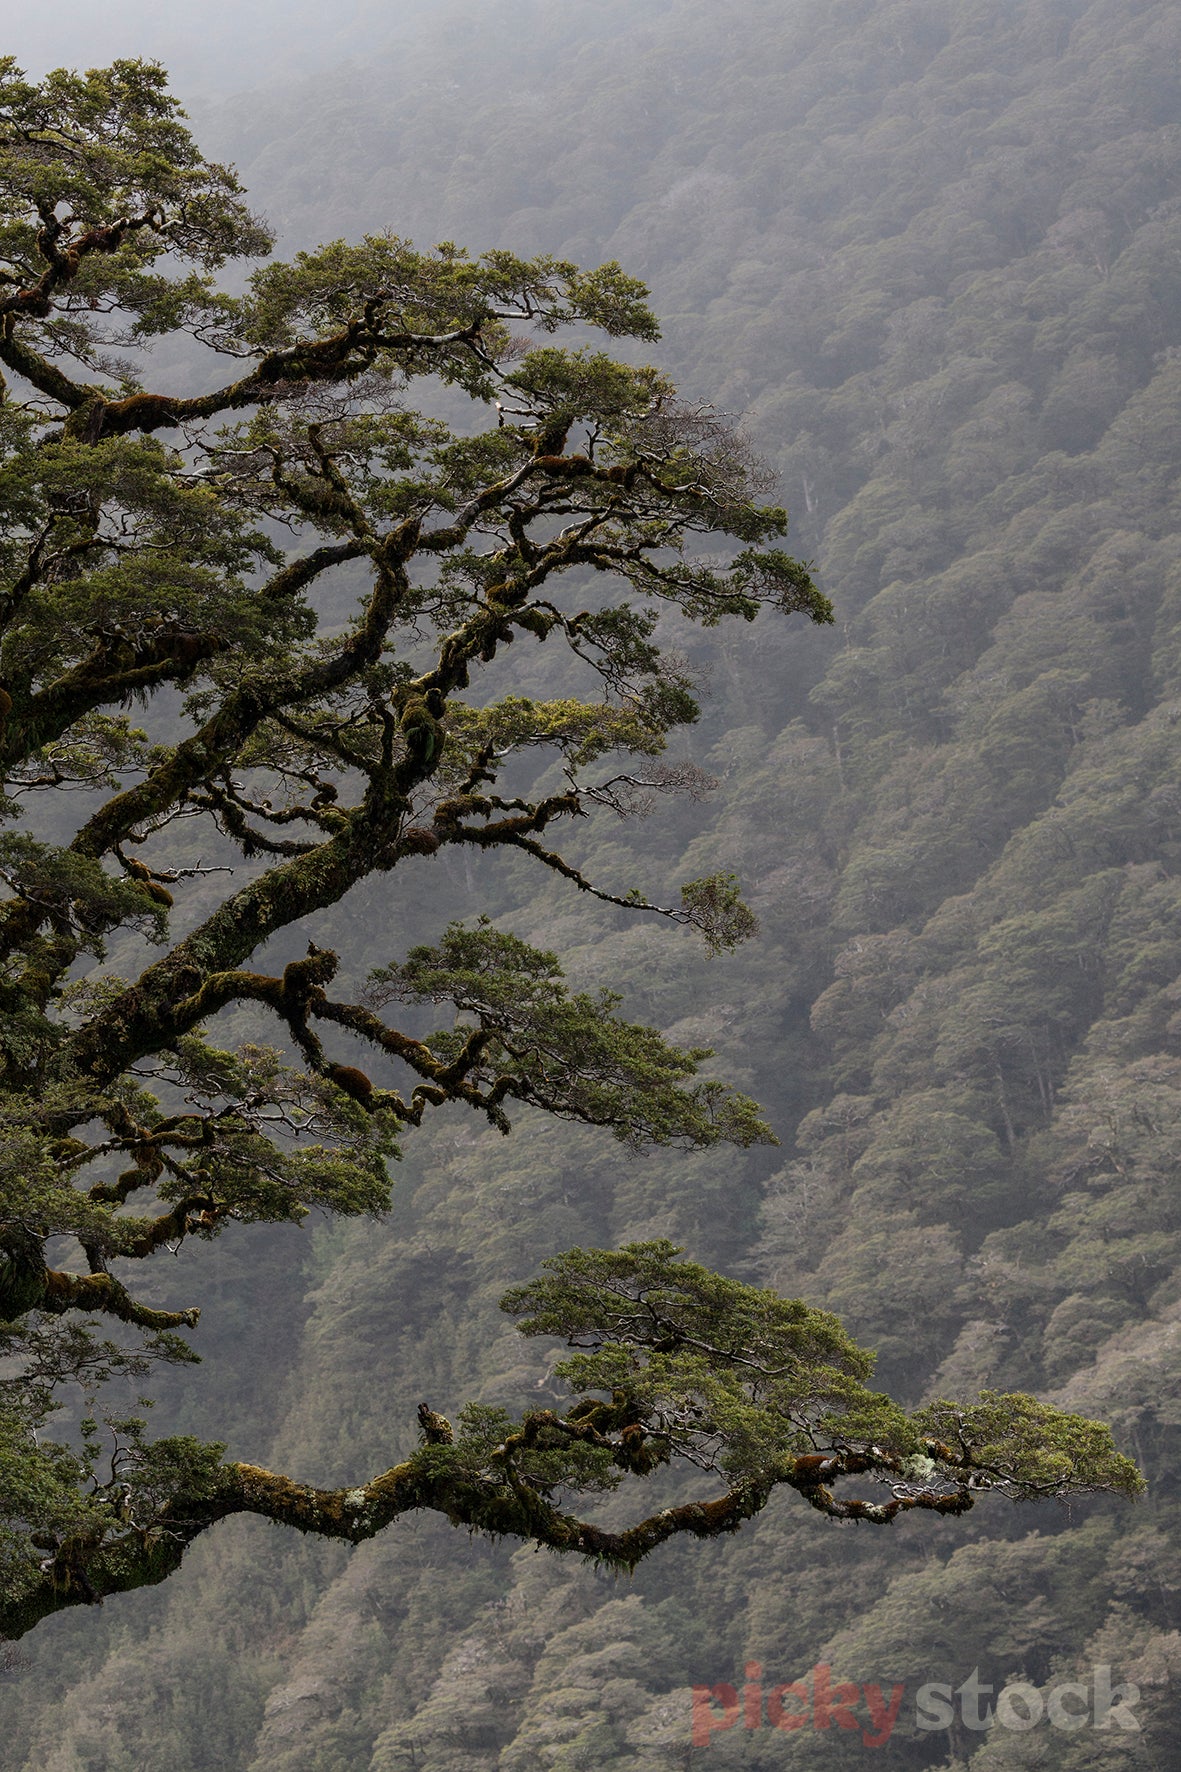 Portrait image of Fiordland forest. Tree, which looks old is in foreground, background, shallow depth of field. Tree is green with brown branches. 